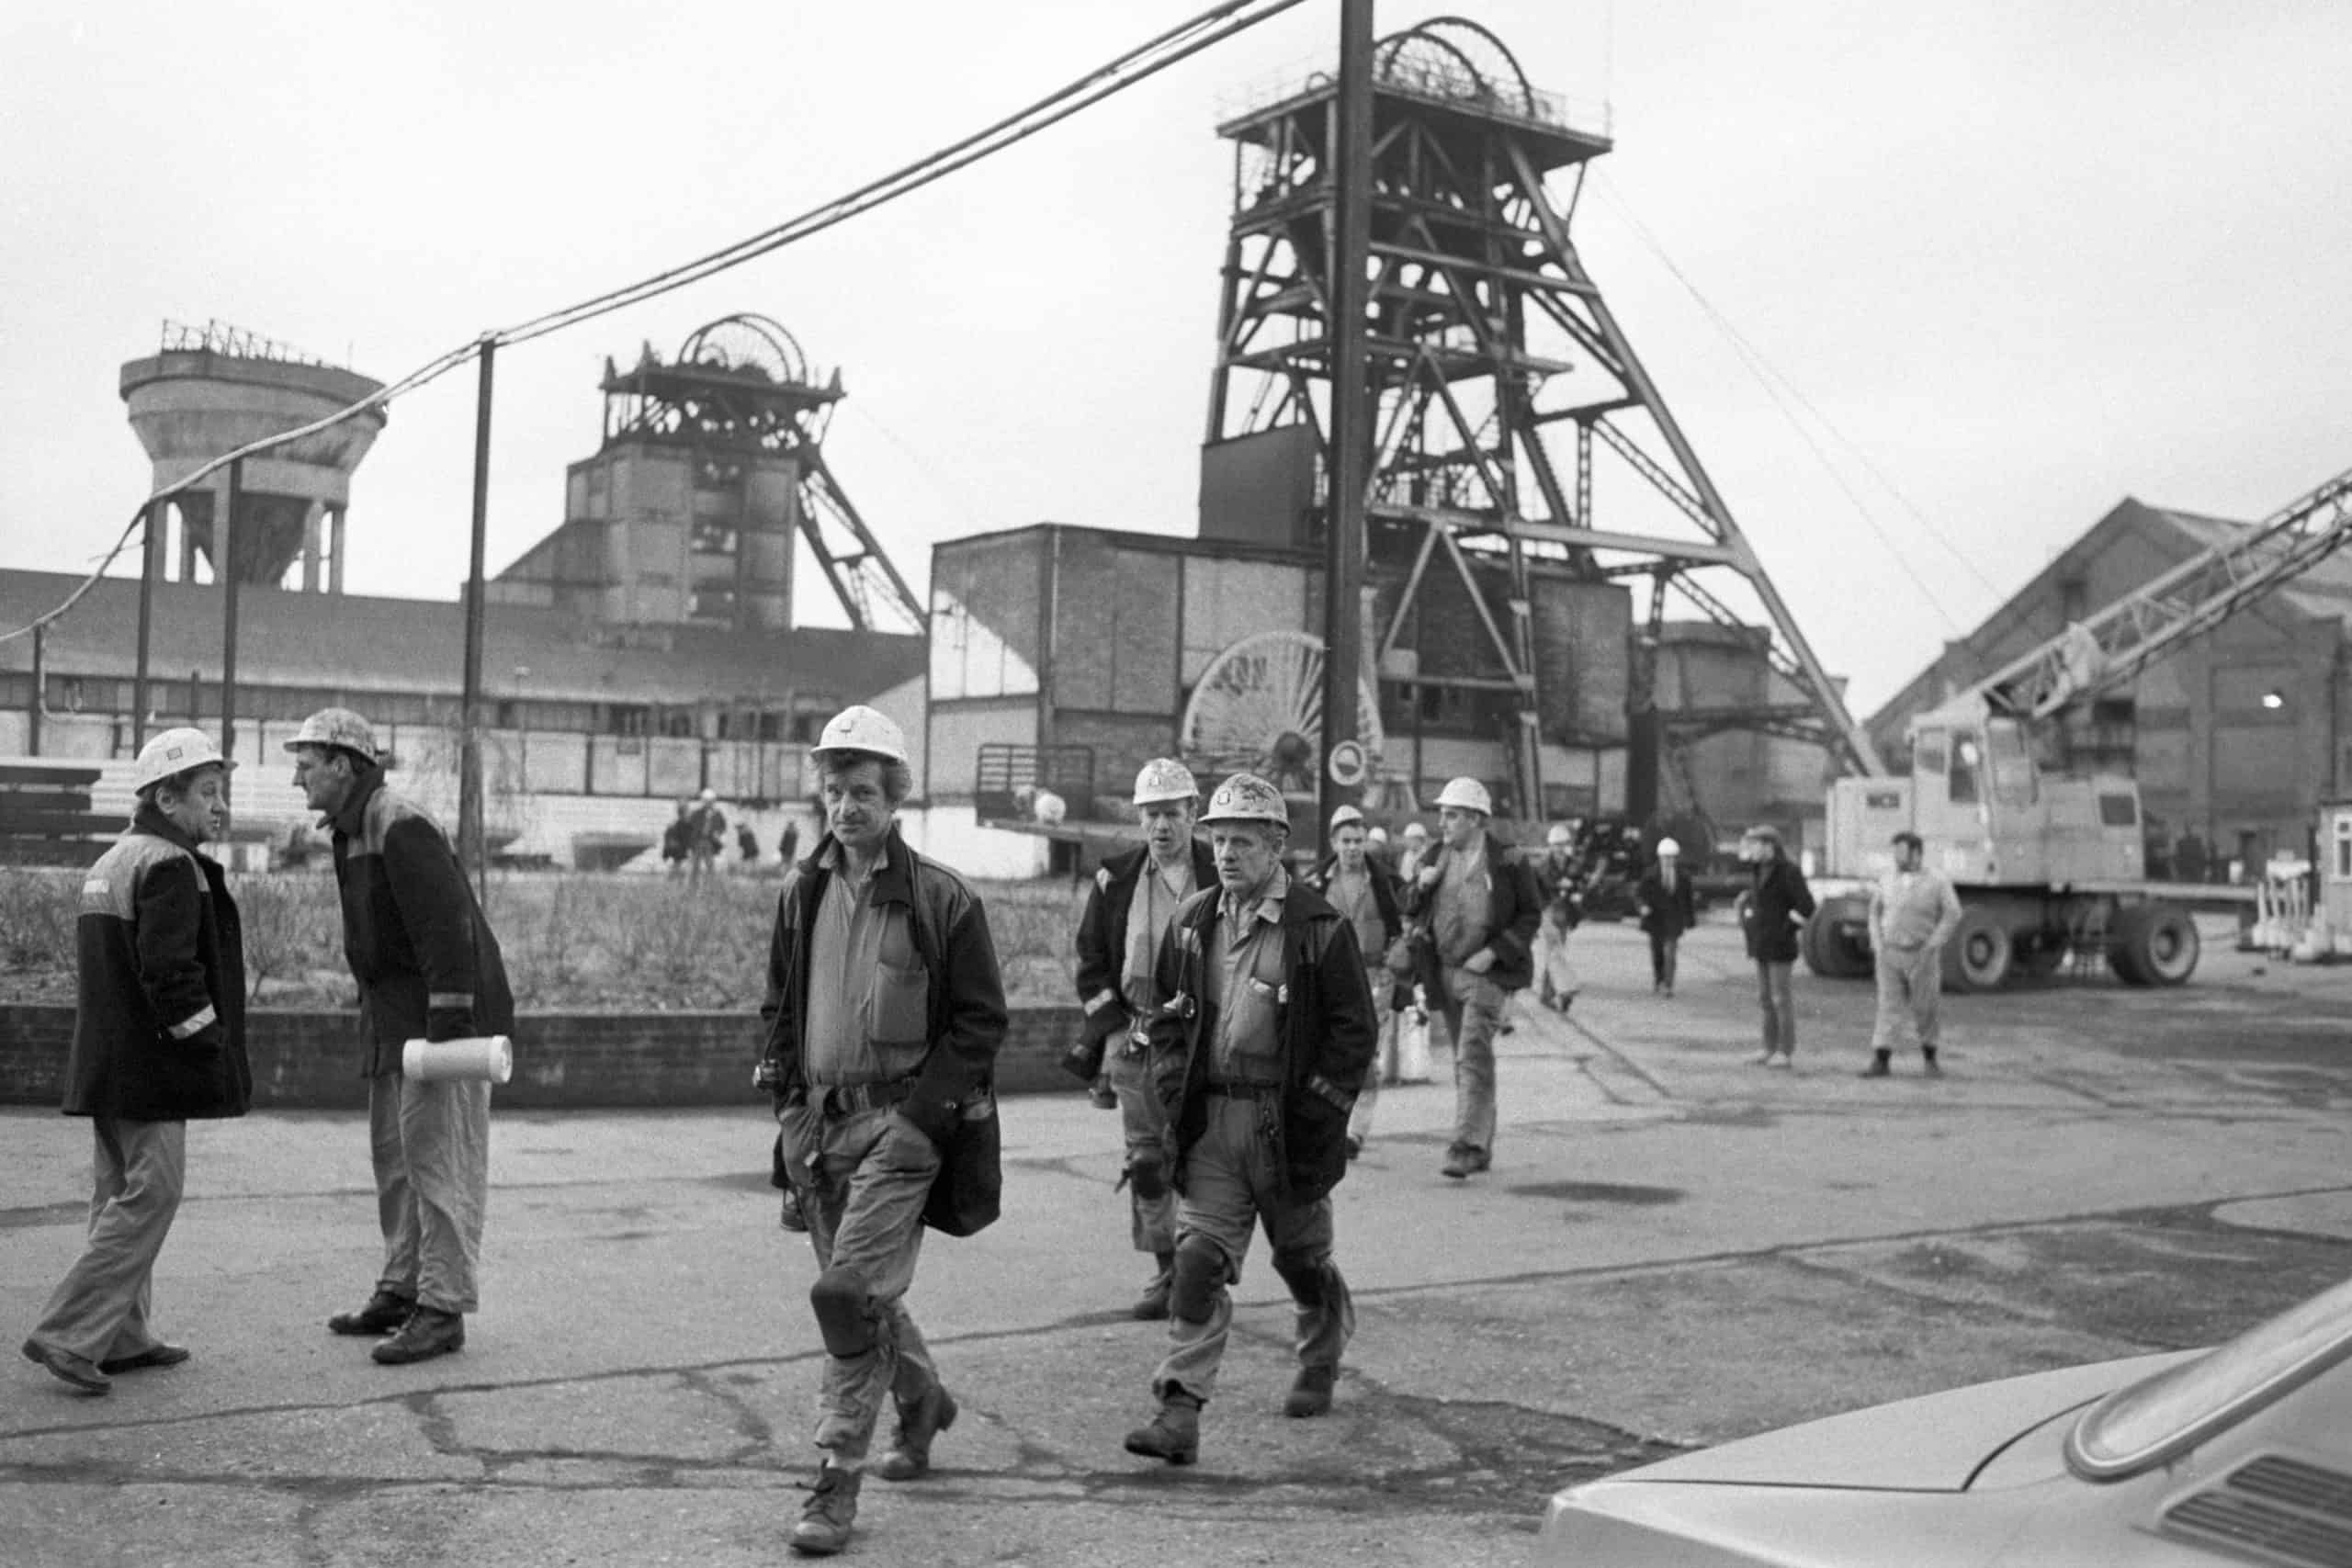 New film to mark 35th anniversary of the end of the year long miners’ strike